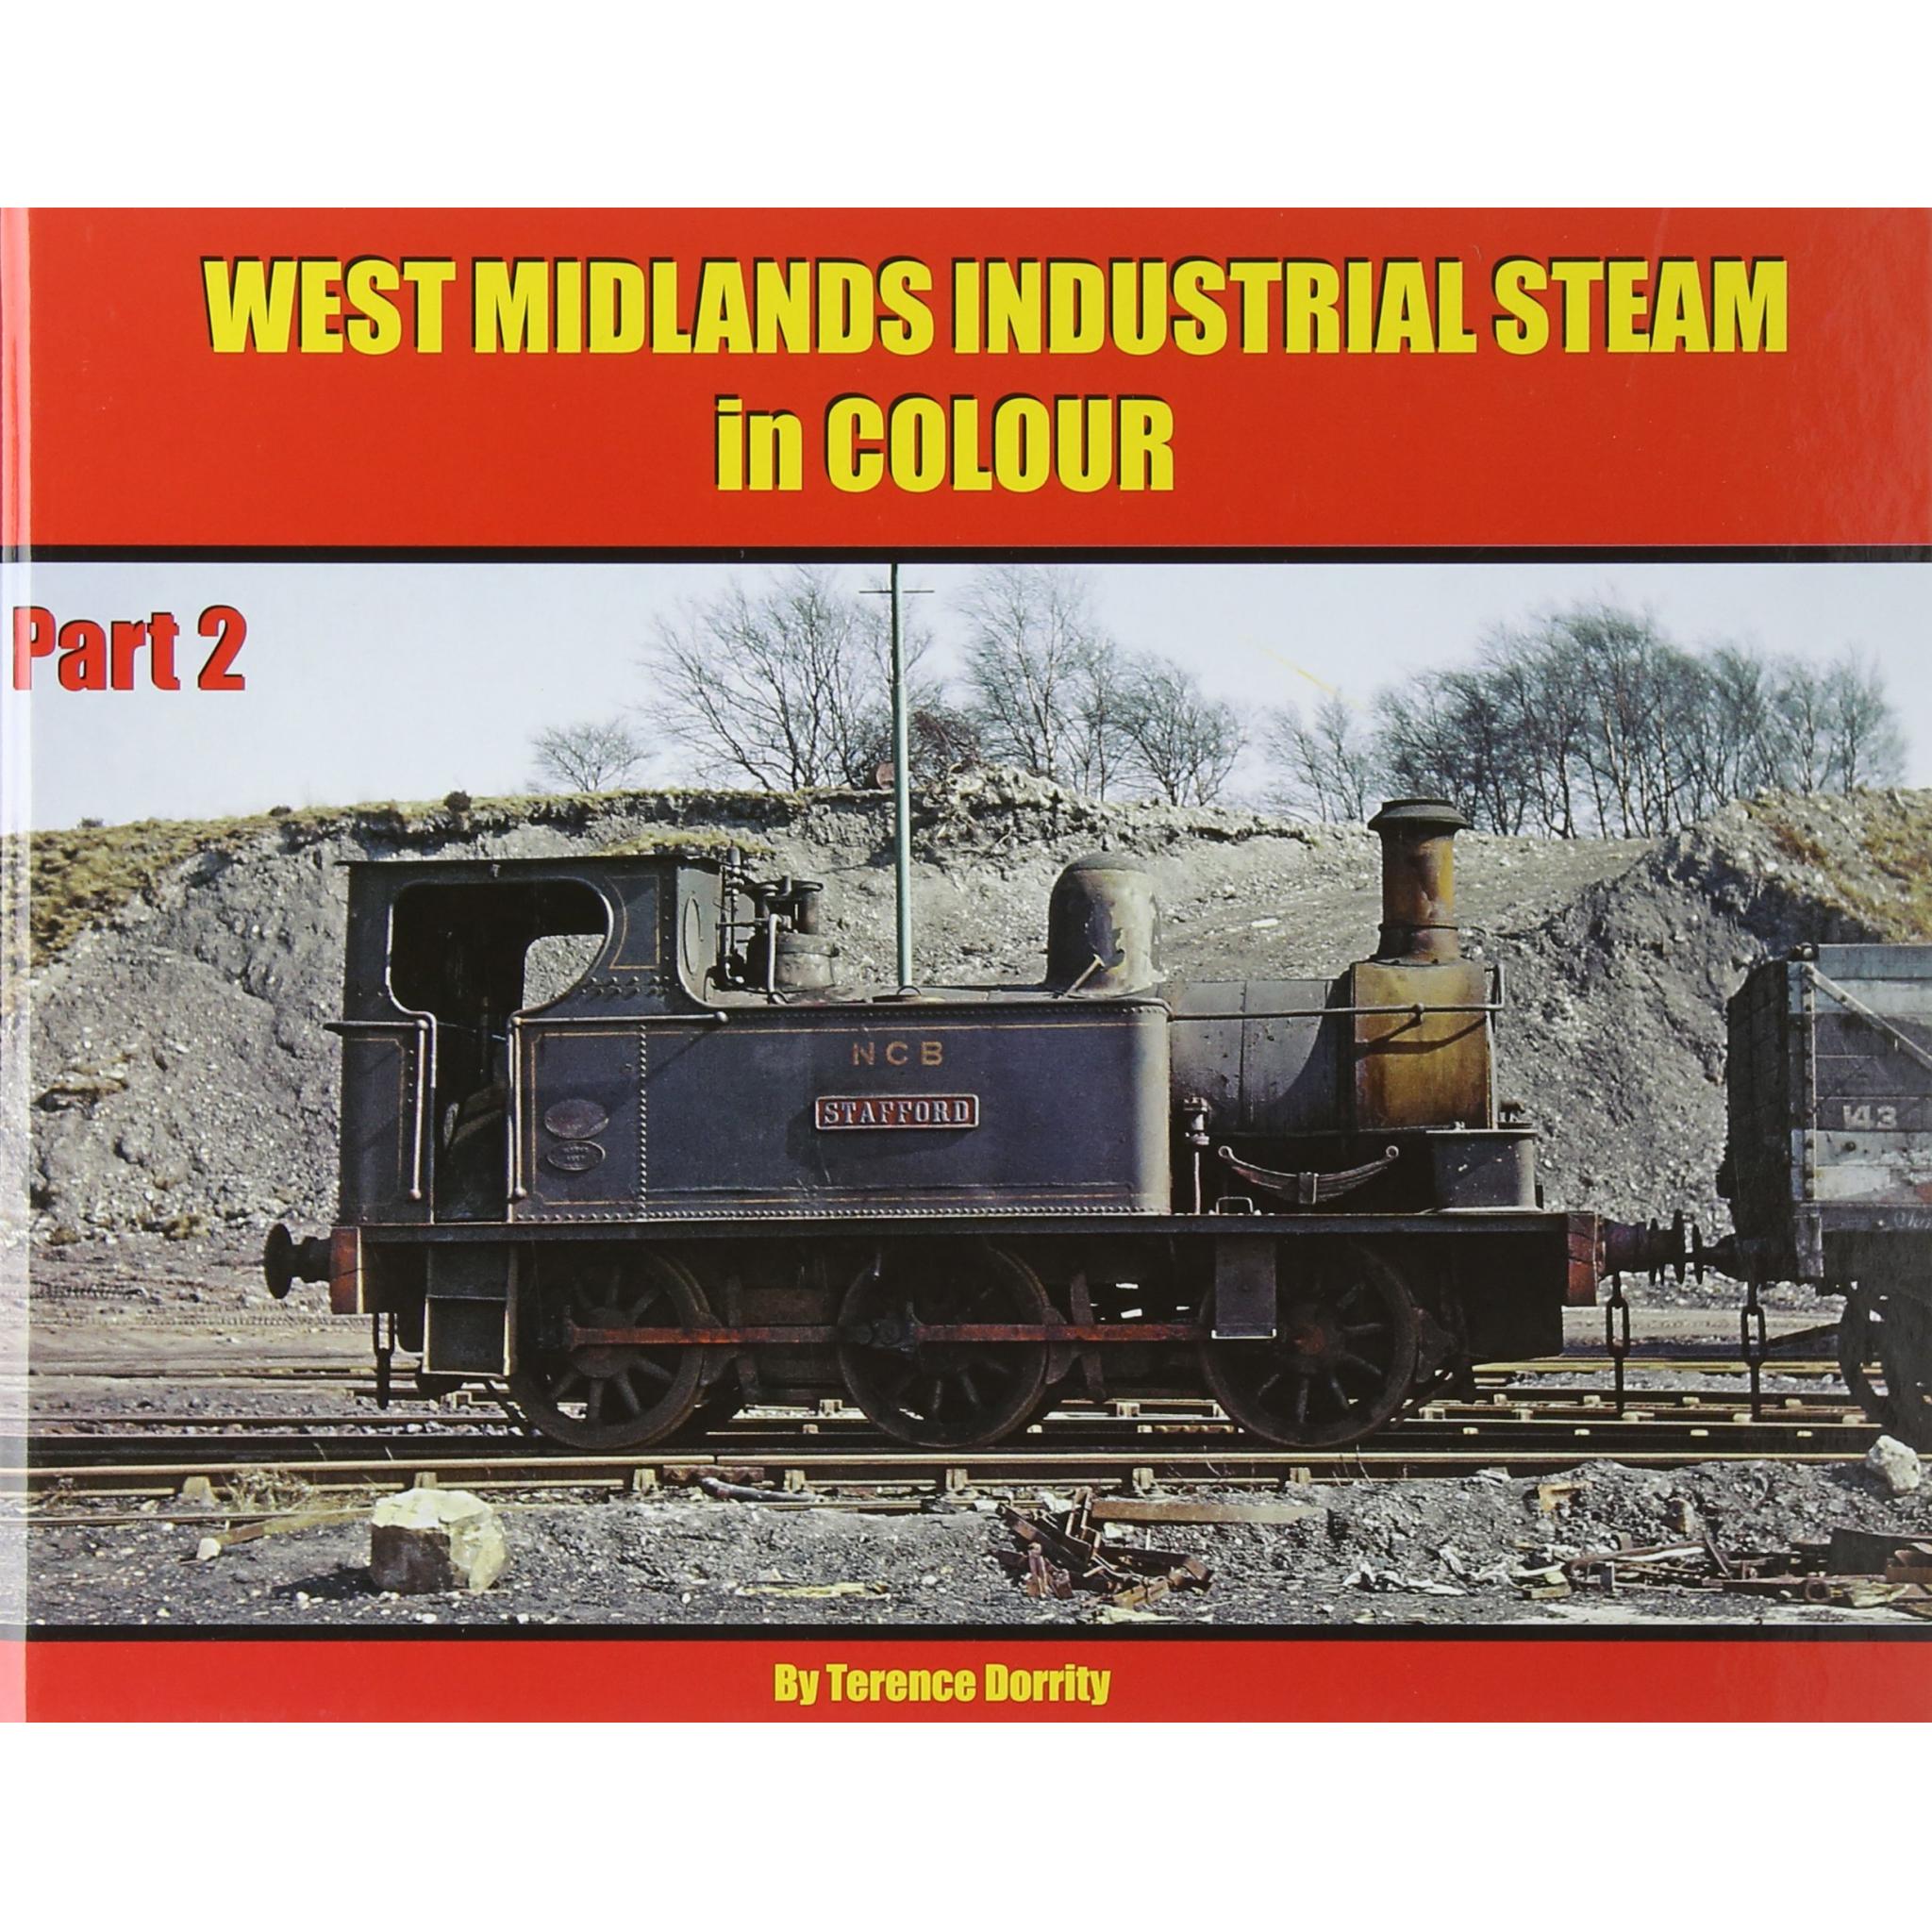 50%+ OFF RRP is £12.99  WEST MIDLANDS INDUSTRIAL STEAM IN COLOUR PART 2